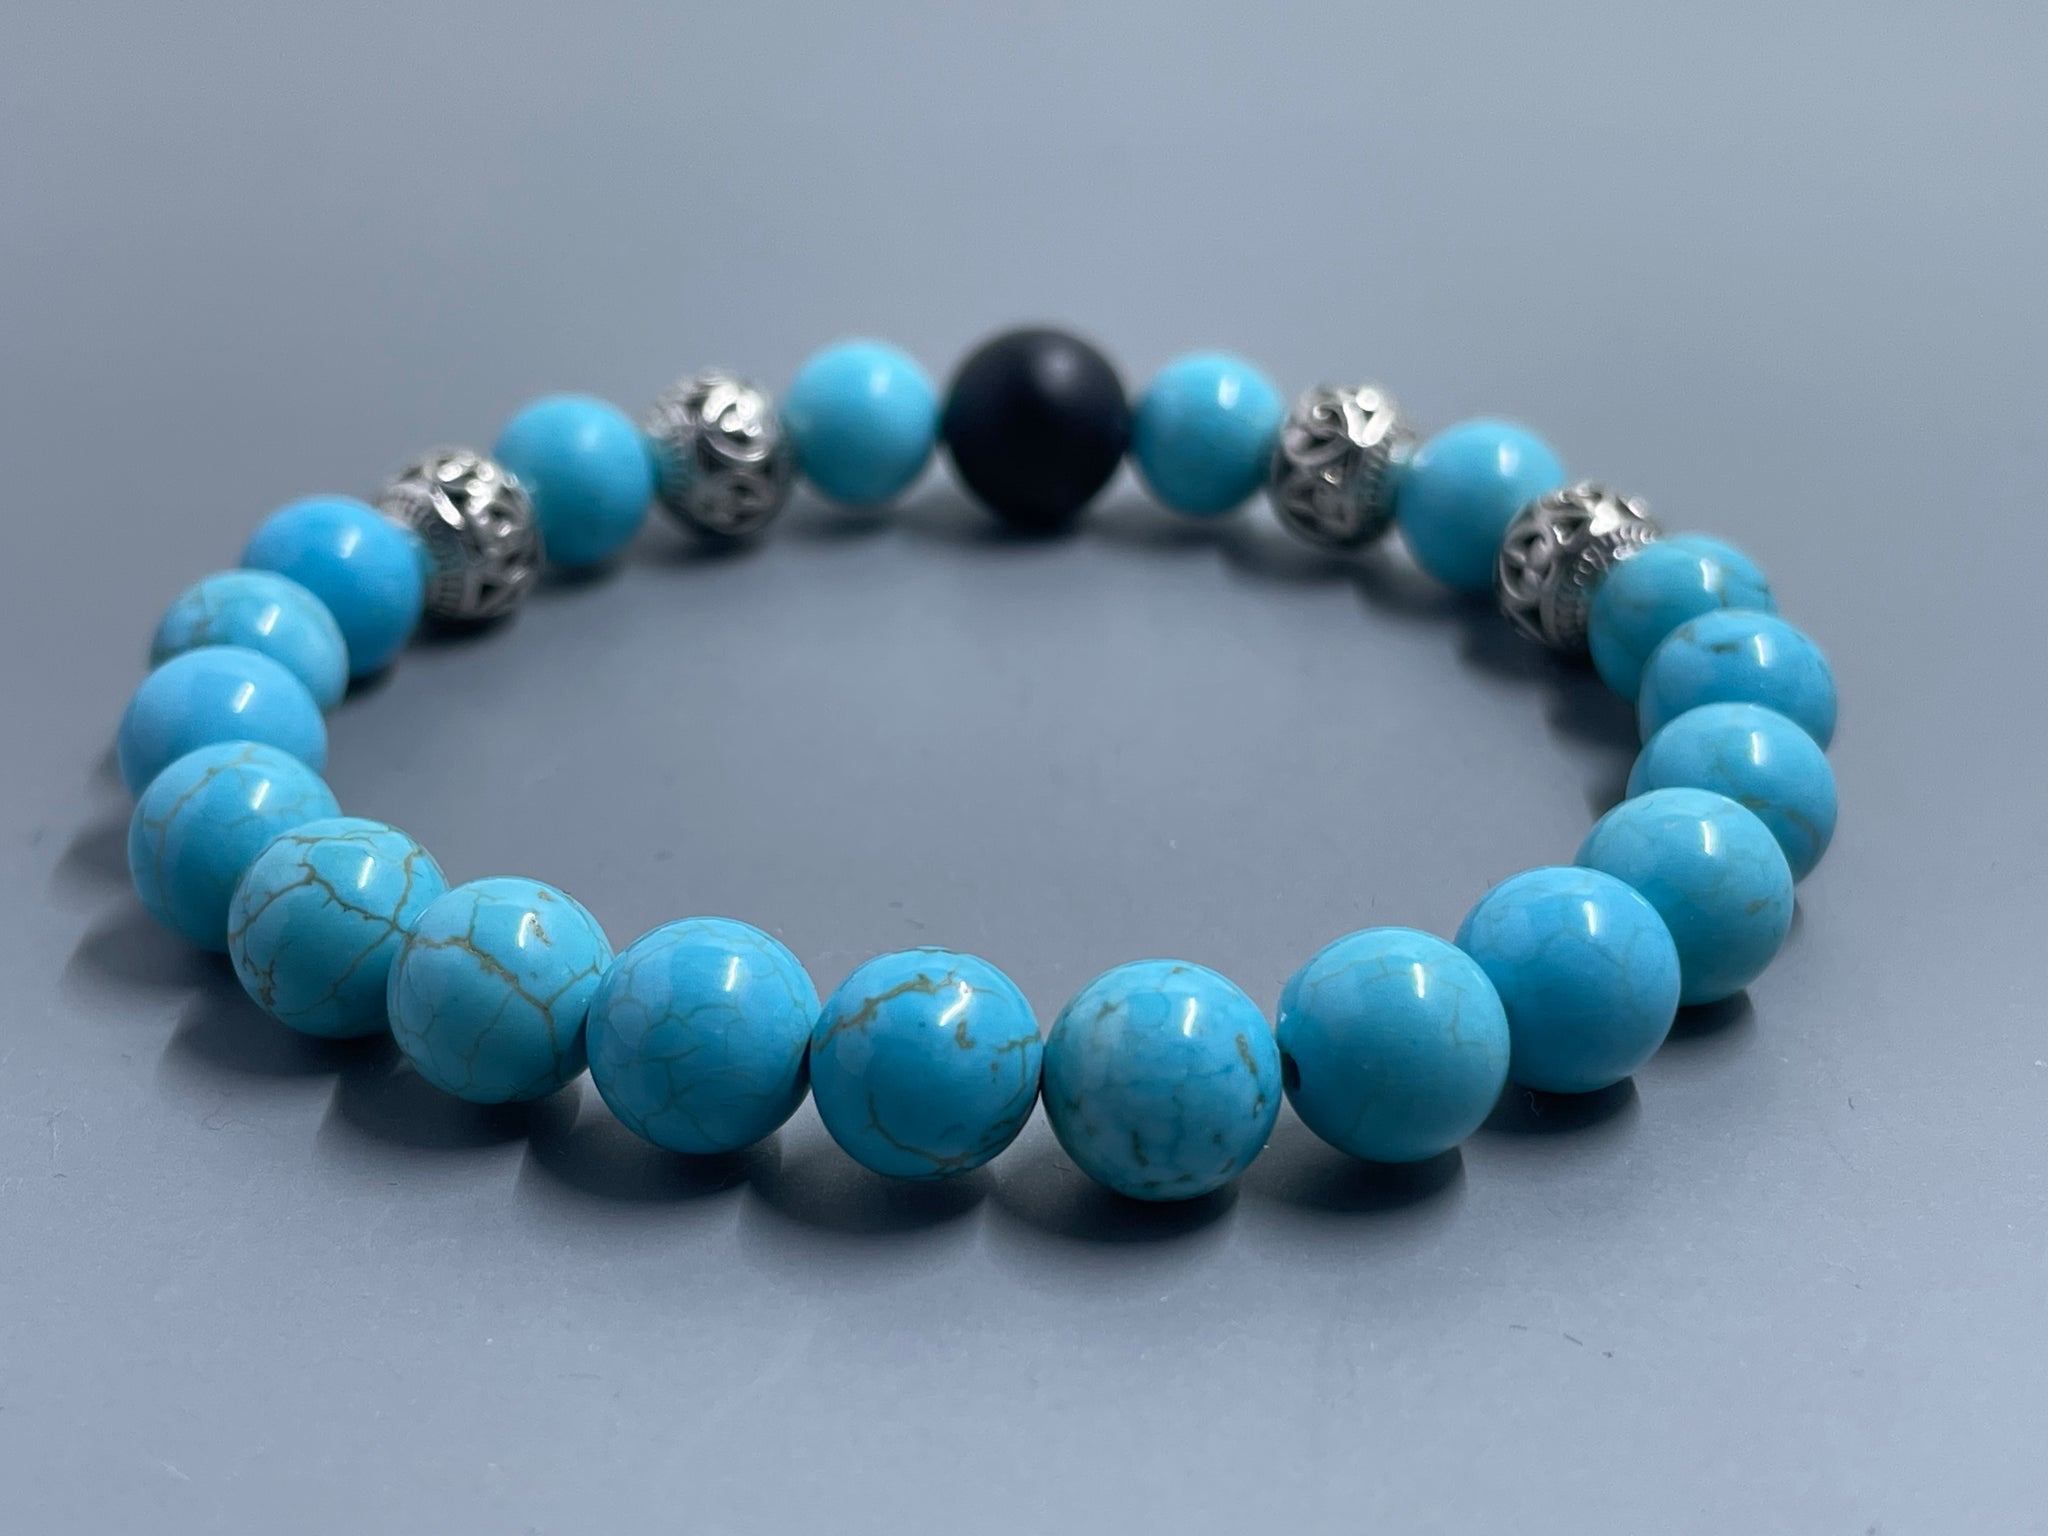 Turquoise Onyx w/ Silver